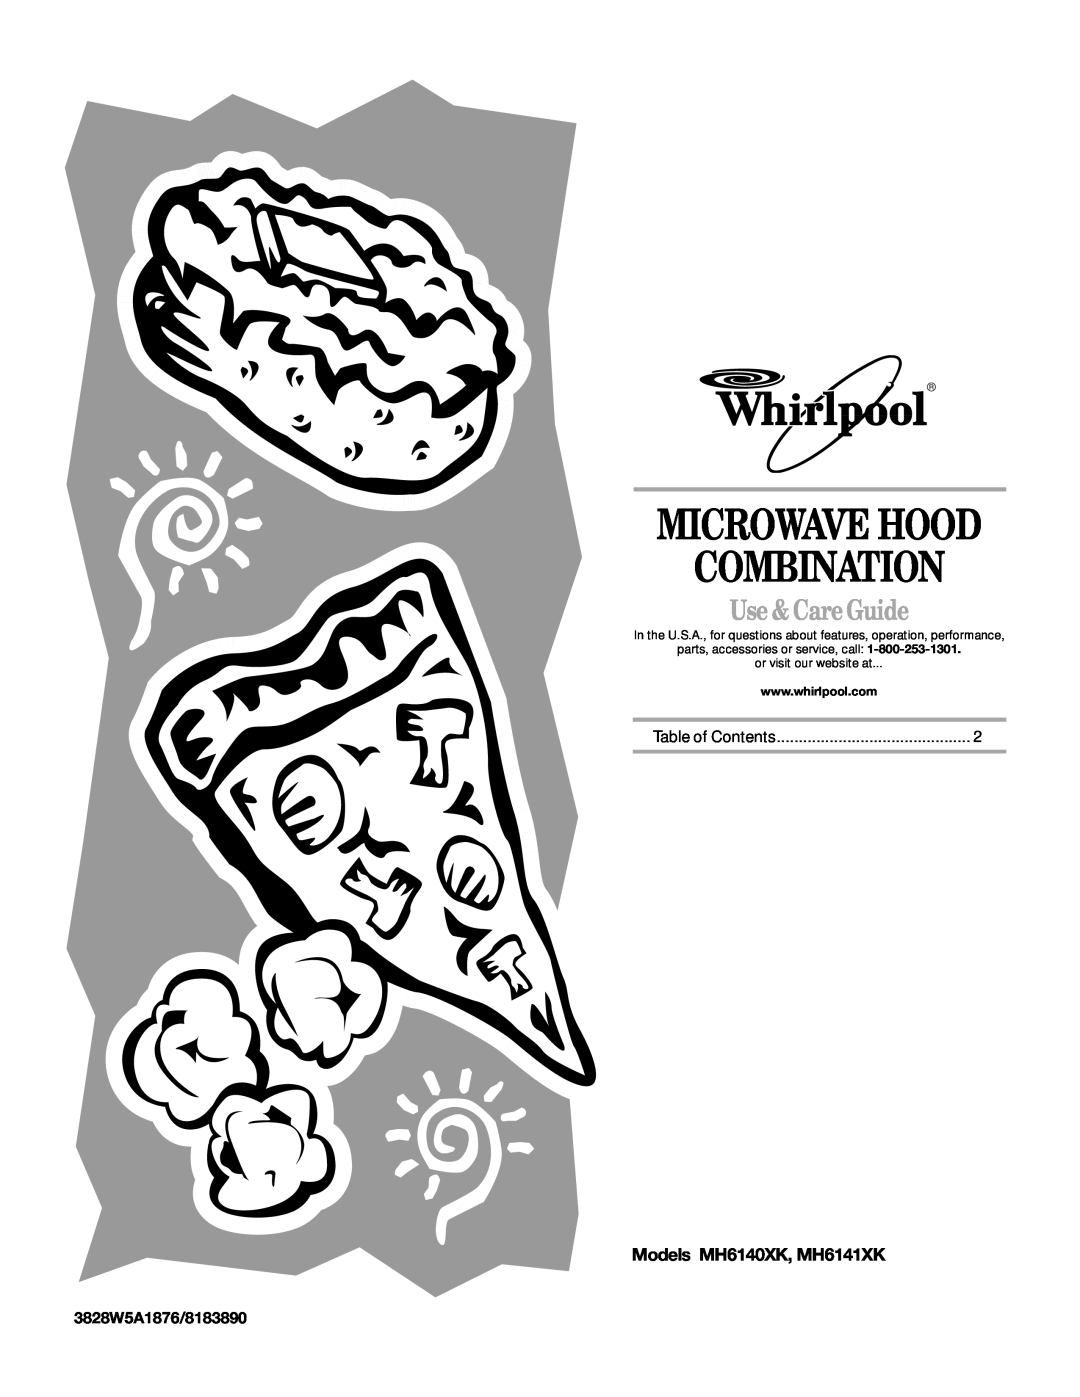 Whirlpool MH6140XK, MH6141XK manual Microwave Hood Combination, Use & Care Guide 